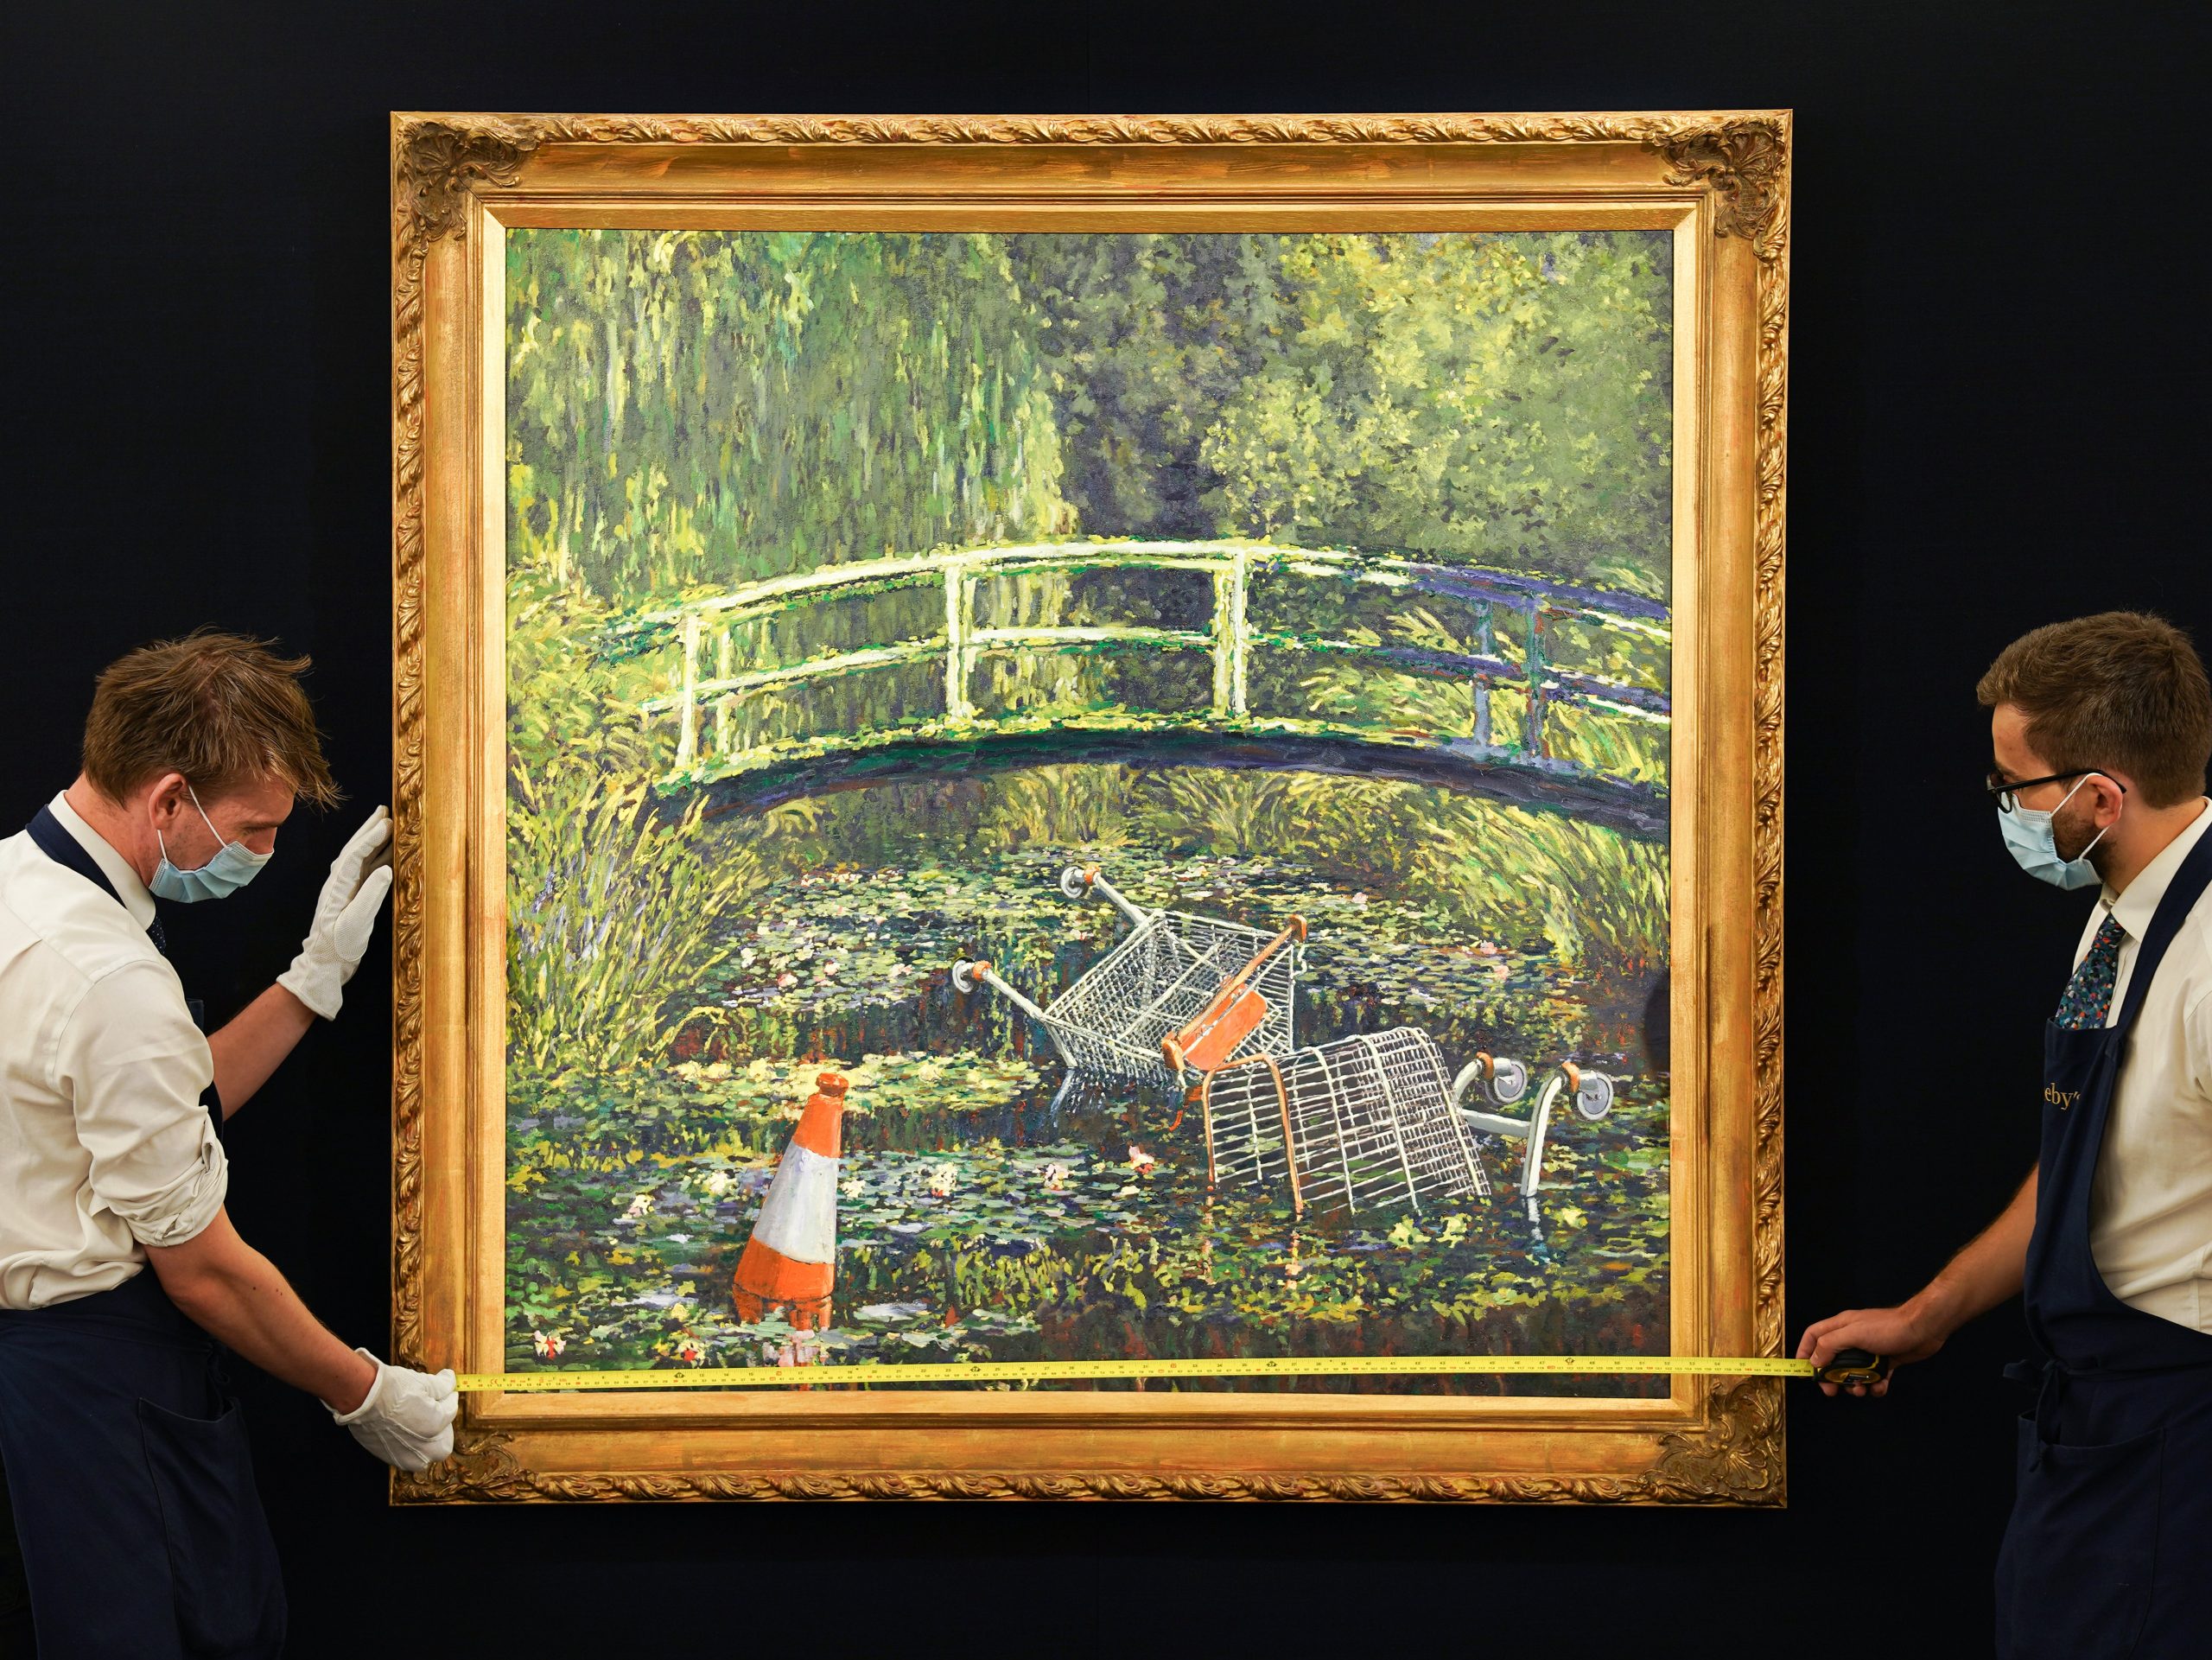 Banksy’s “ Show Me the Monet ” became the second most expensive work of art ever